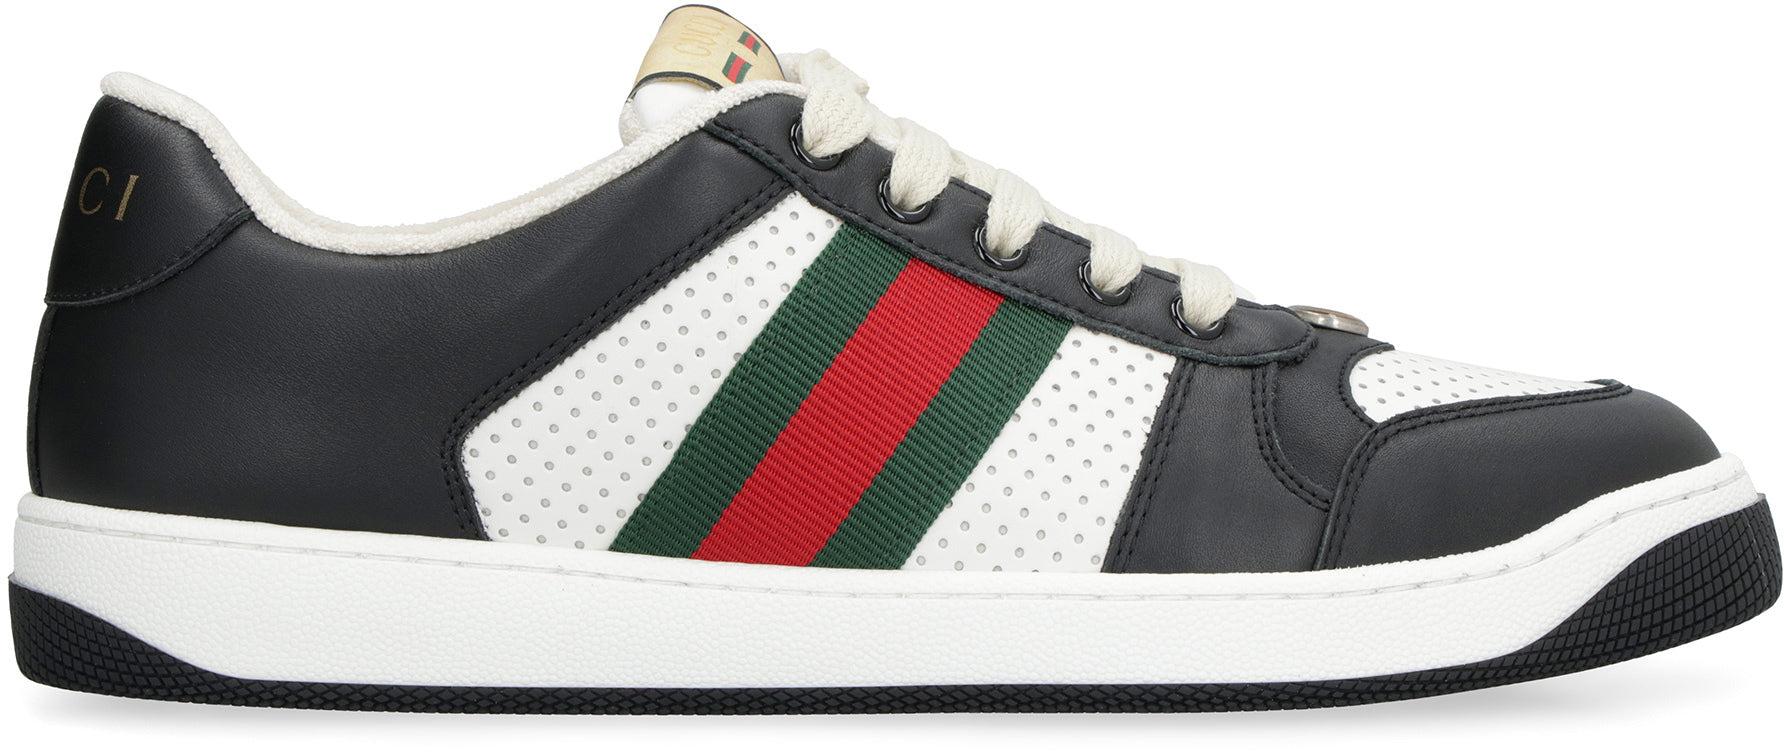 Gucci Men's Chunky B Low-top Sneakers - Grey Black - Size 10